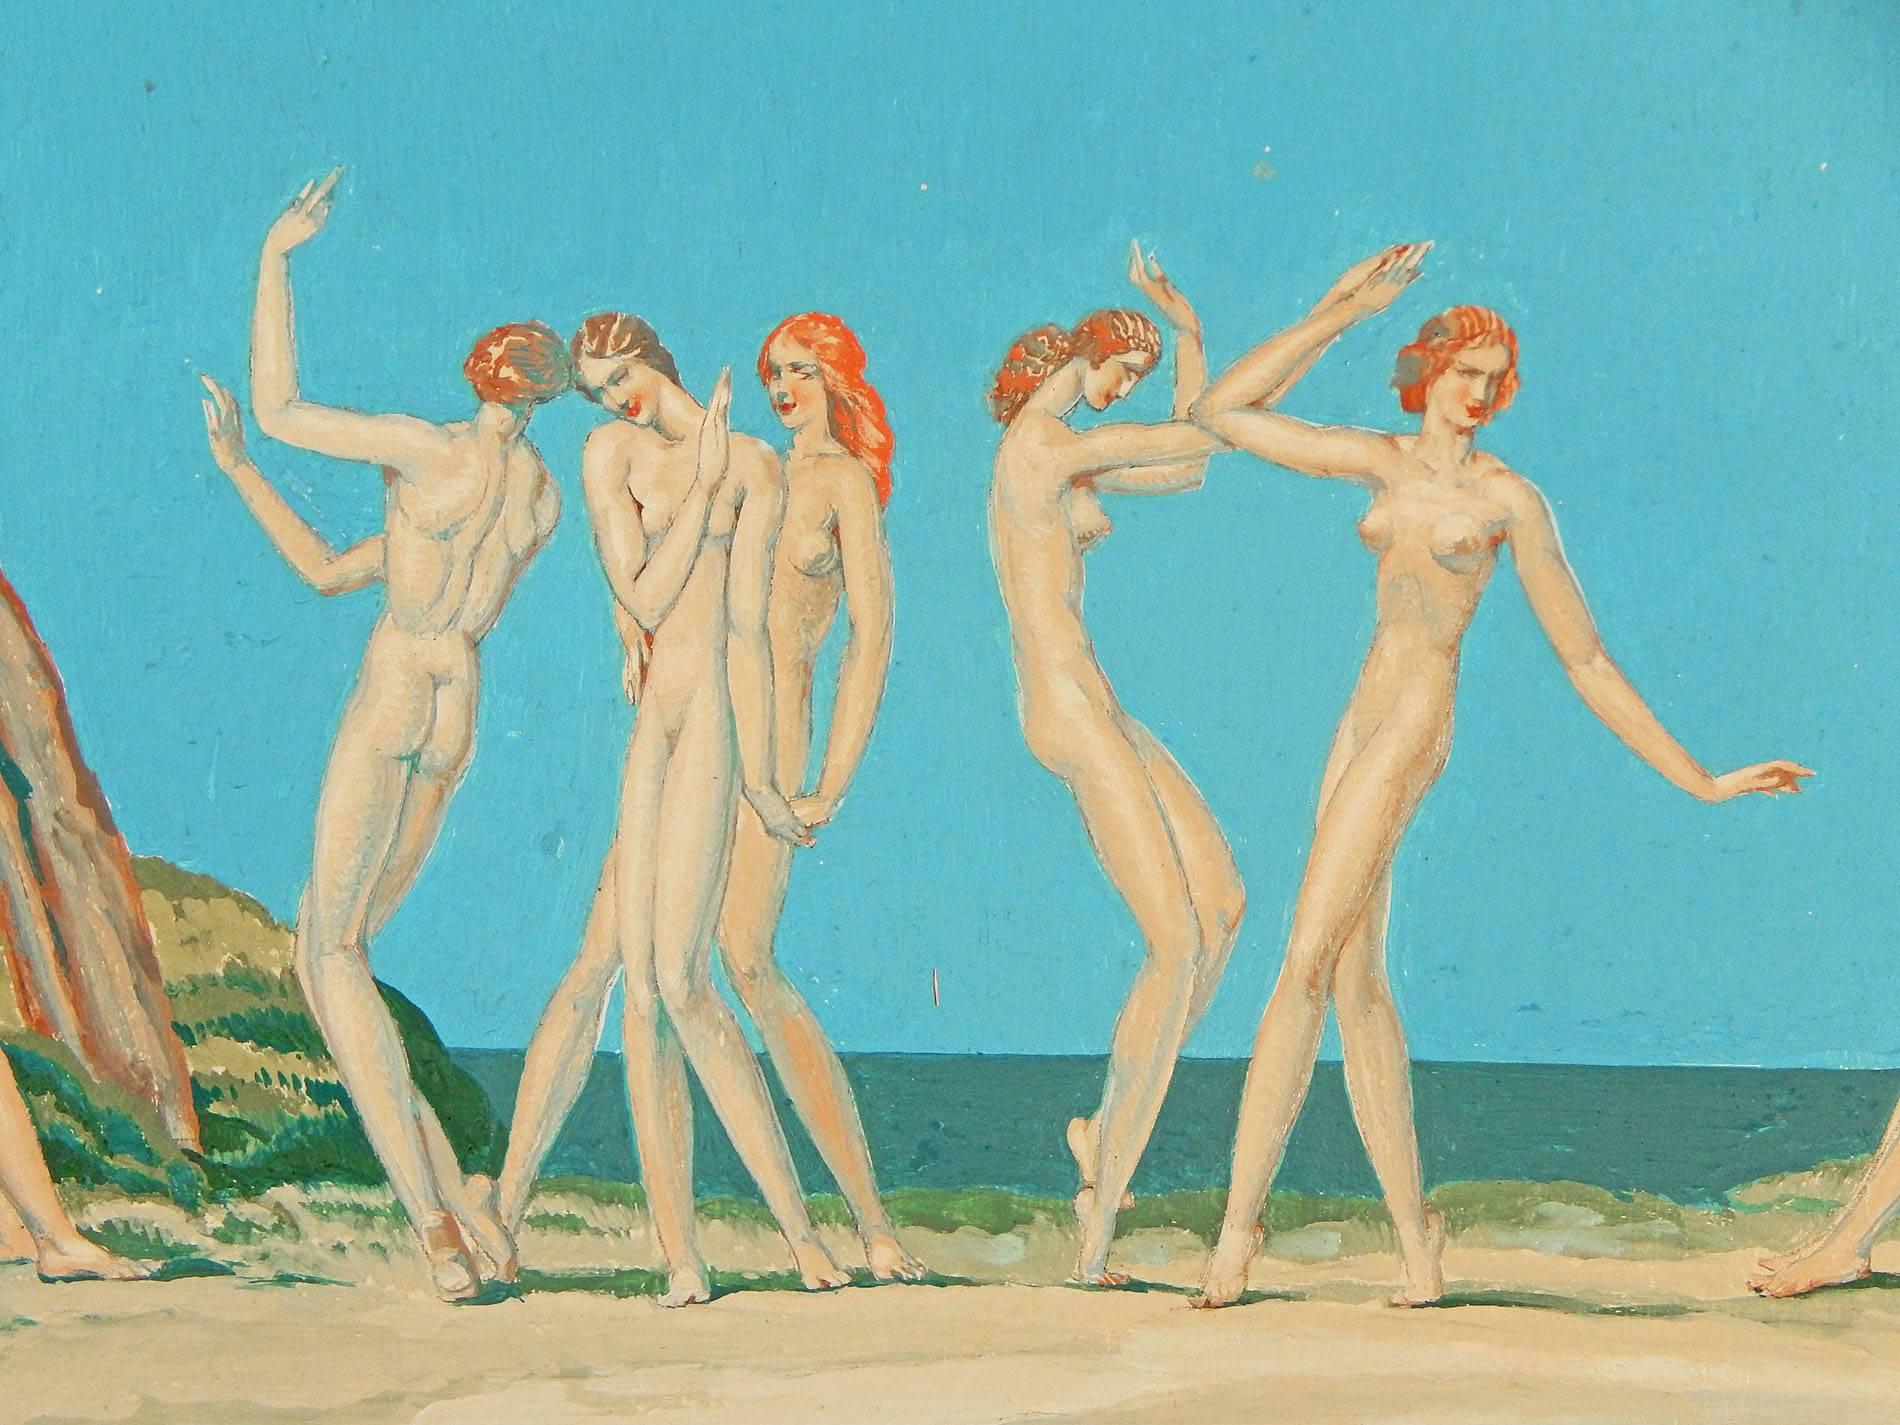 A timeless and elegant example of Art Deco painting at its best, this work by Louis Rigal depicts a line of nude female figures dancing on the sand near the sea, flanked by nude male figures watching in appreciation. Rigal was one of America and